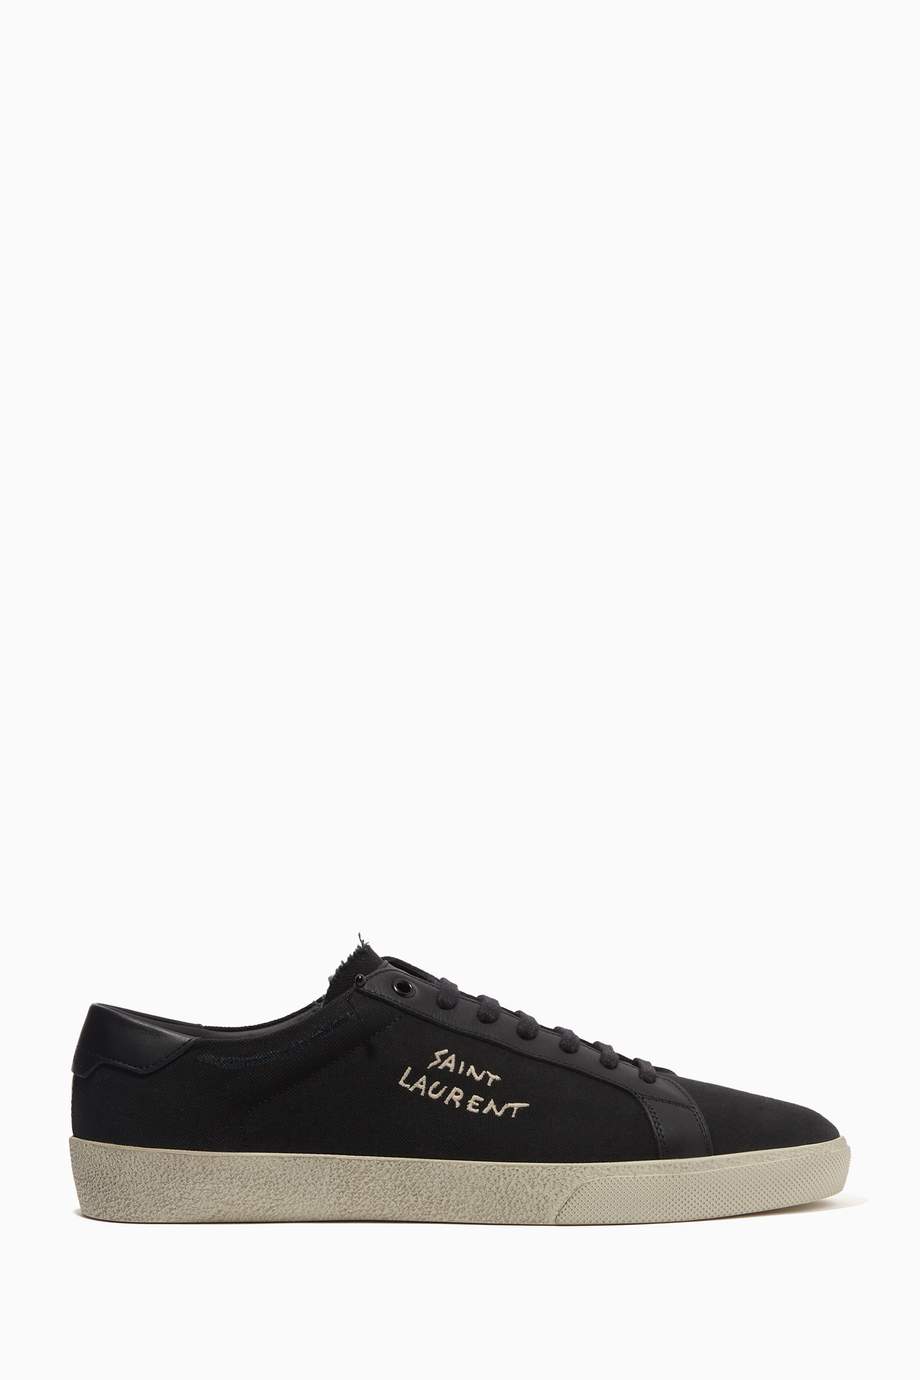 Shop SAINT LAURENT Black Court Classic SL/06 Embroidered Sneakers in ...